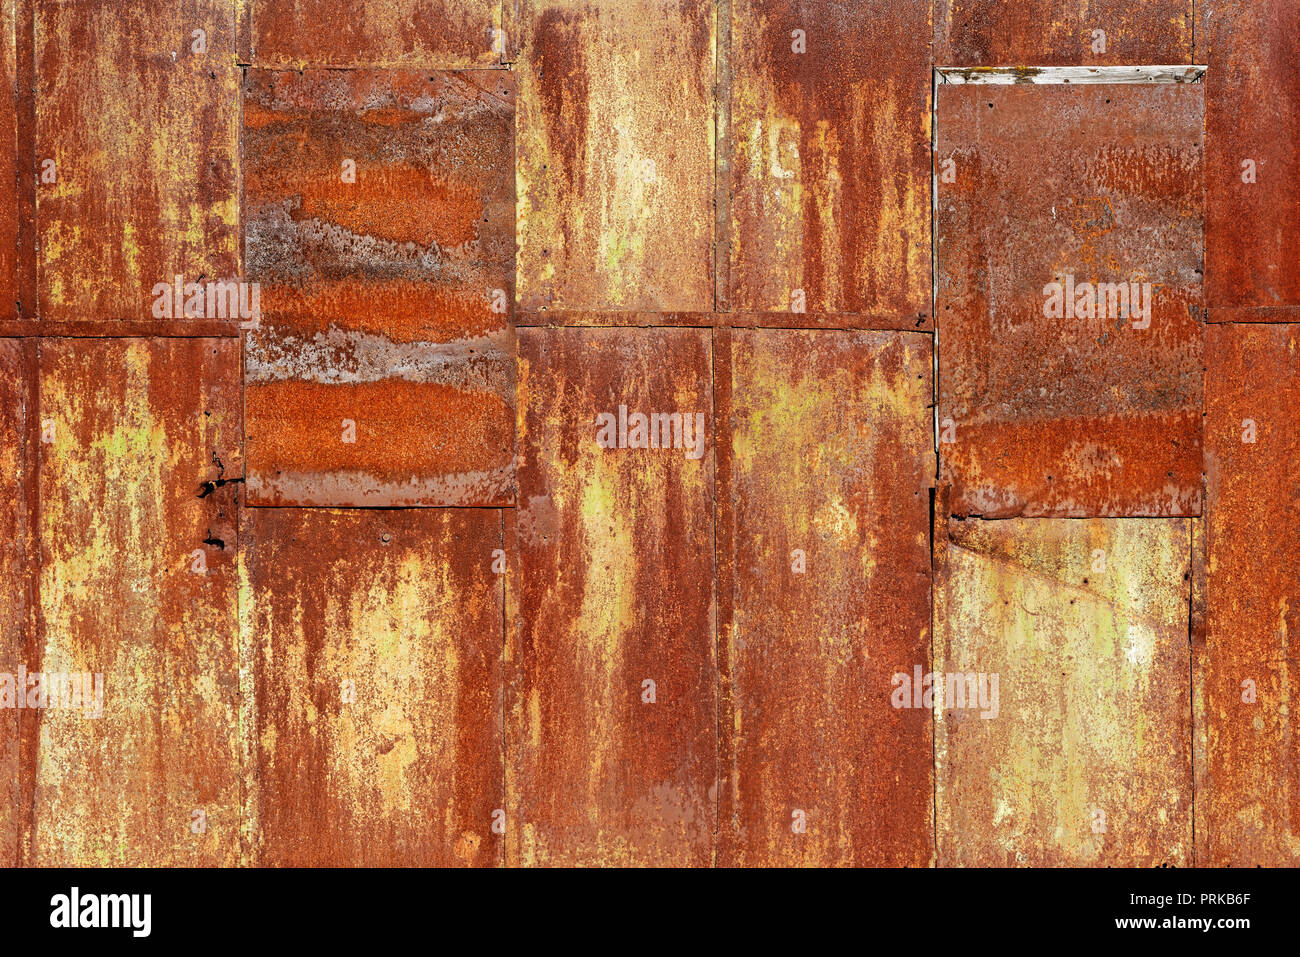 Backgrounds and textures: wall made of rusty metal sheets, uneven joints, industrial abstract Stock Photo